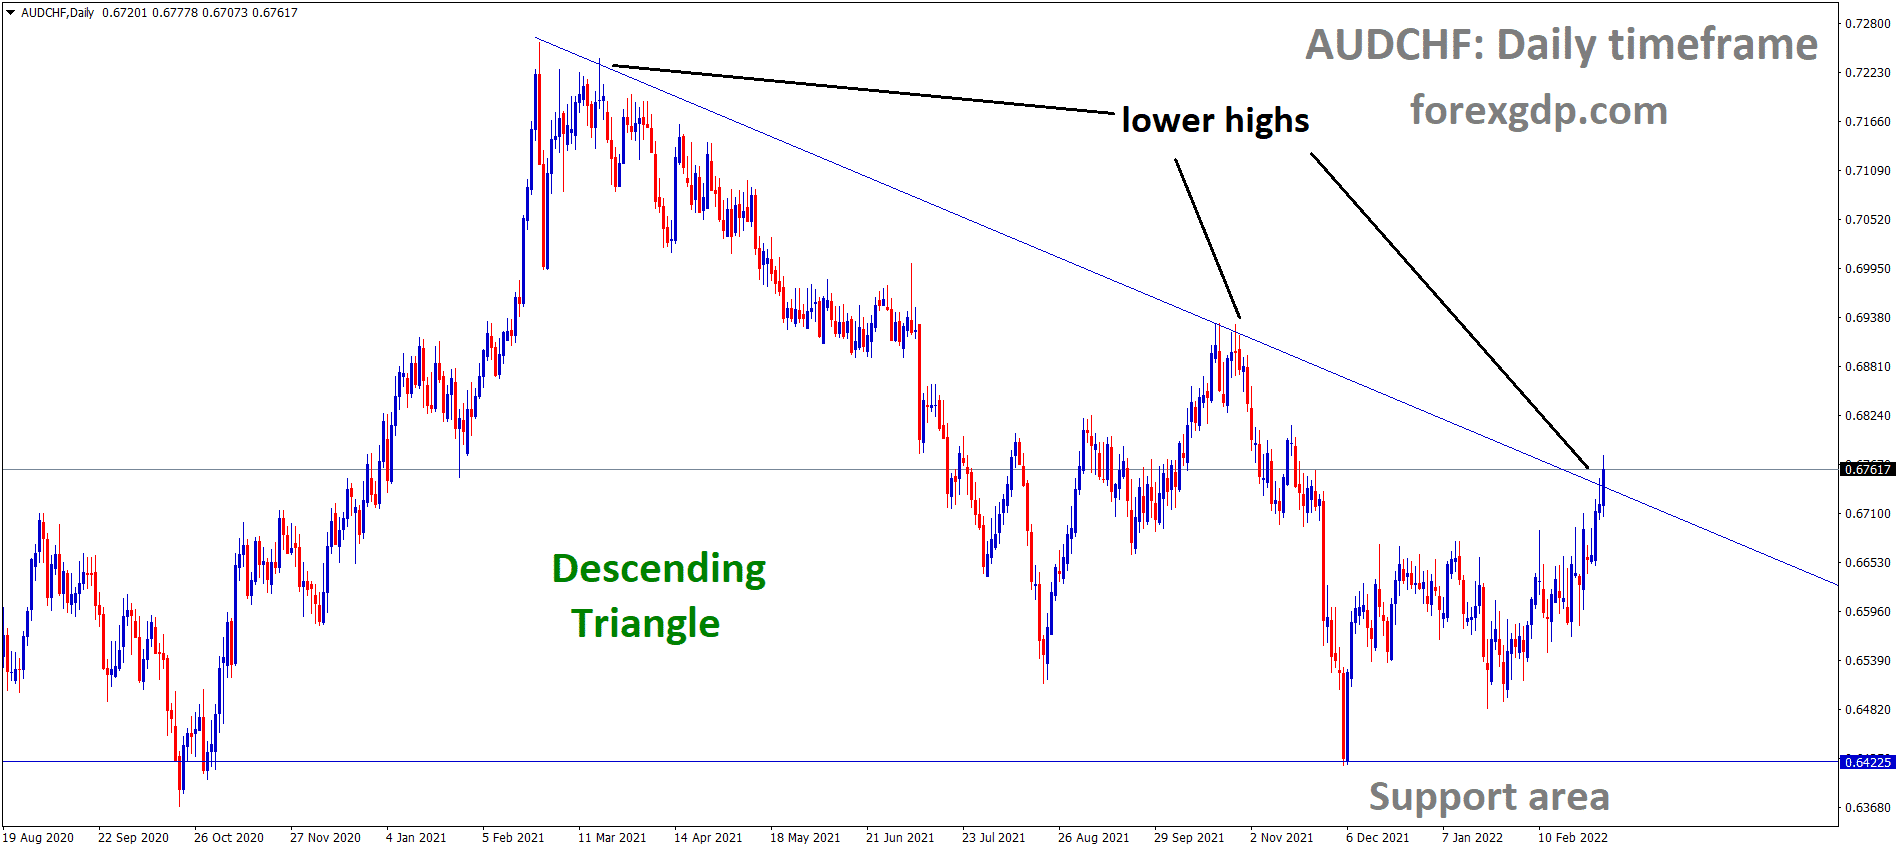 AUDCHF is moving in the Descending triangle pattern and the market has reached the lower high area of the pattern.